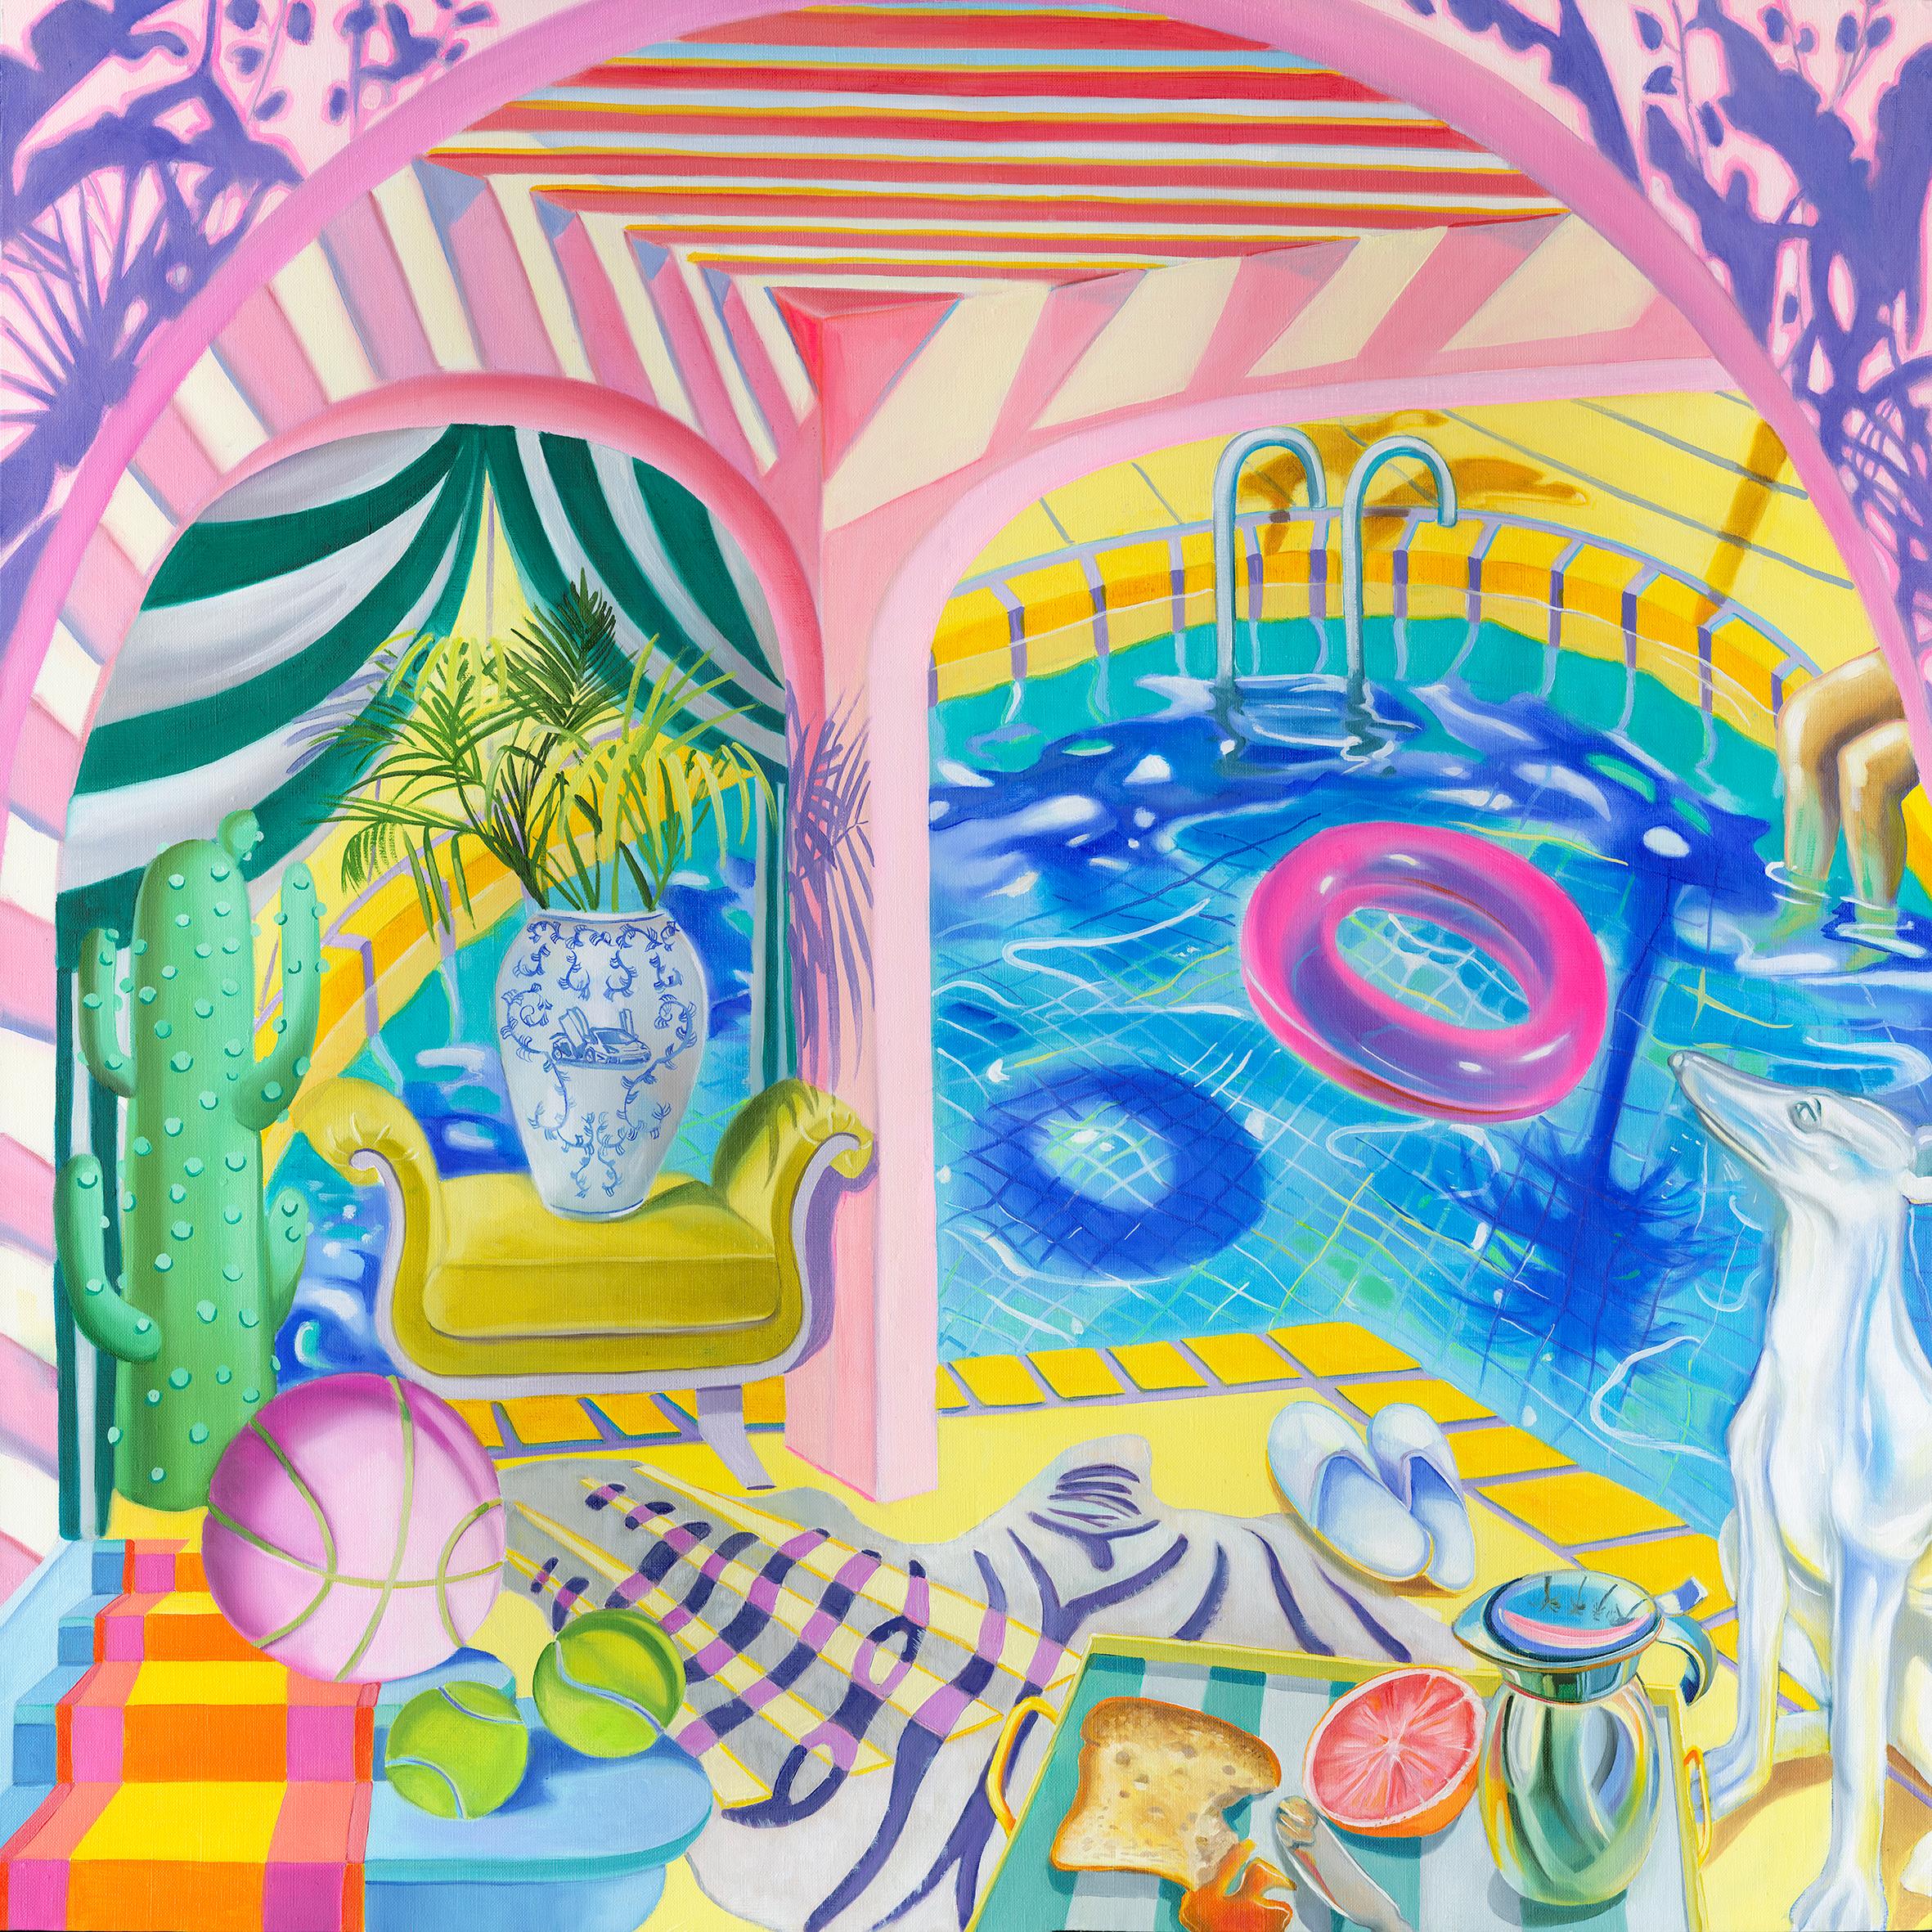 GOLDEN STATE - colorful still-life with pool, dog and vase